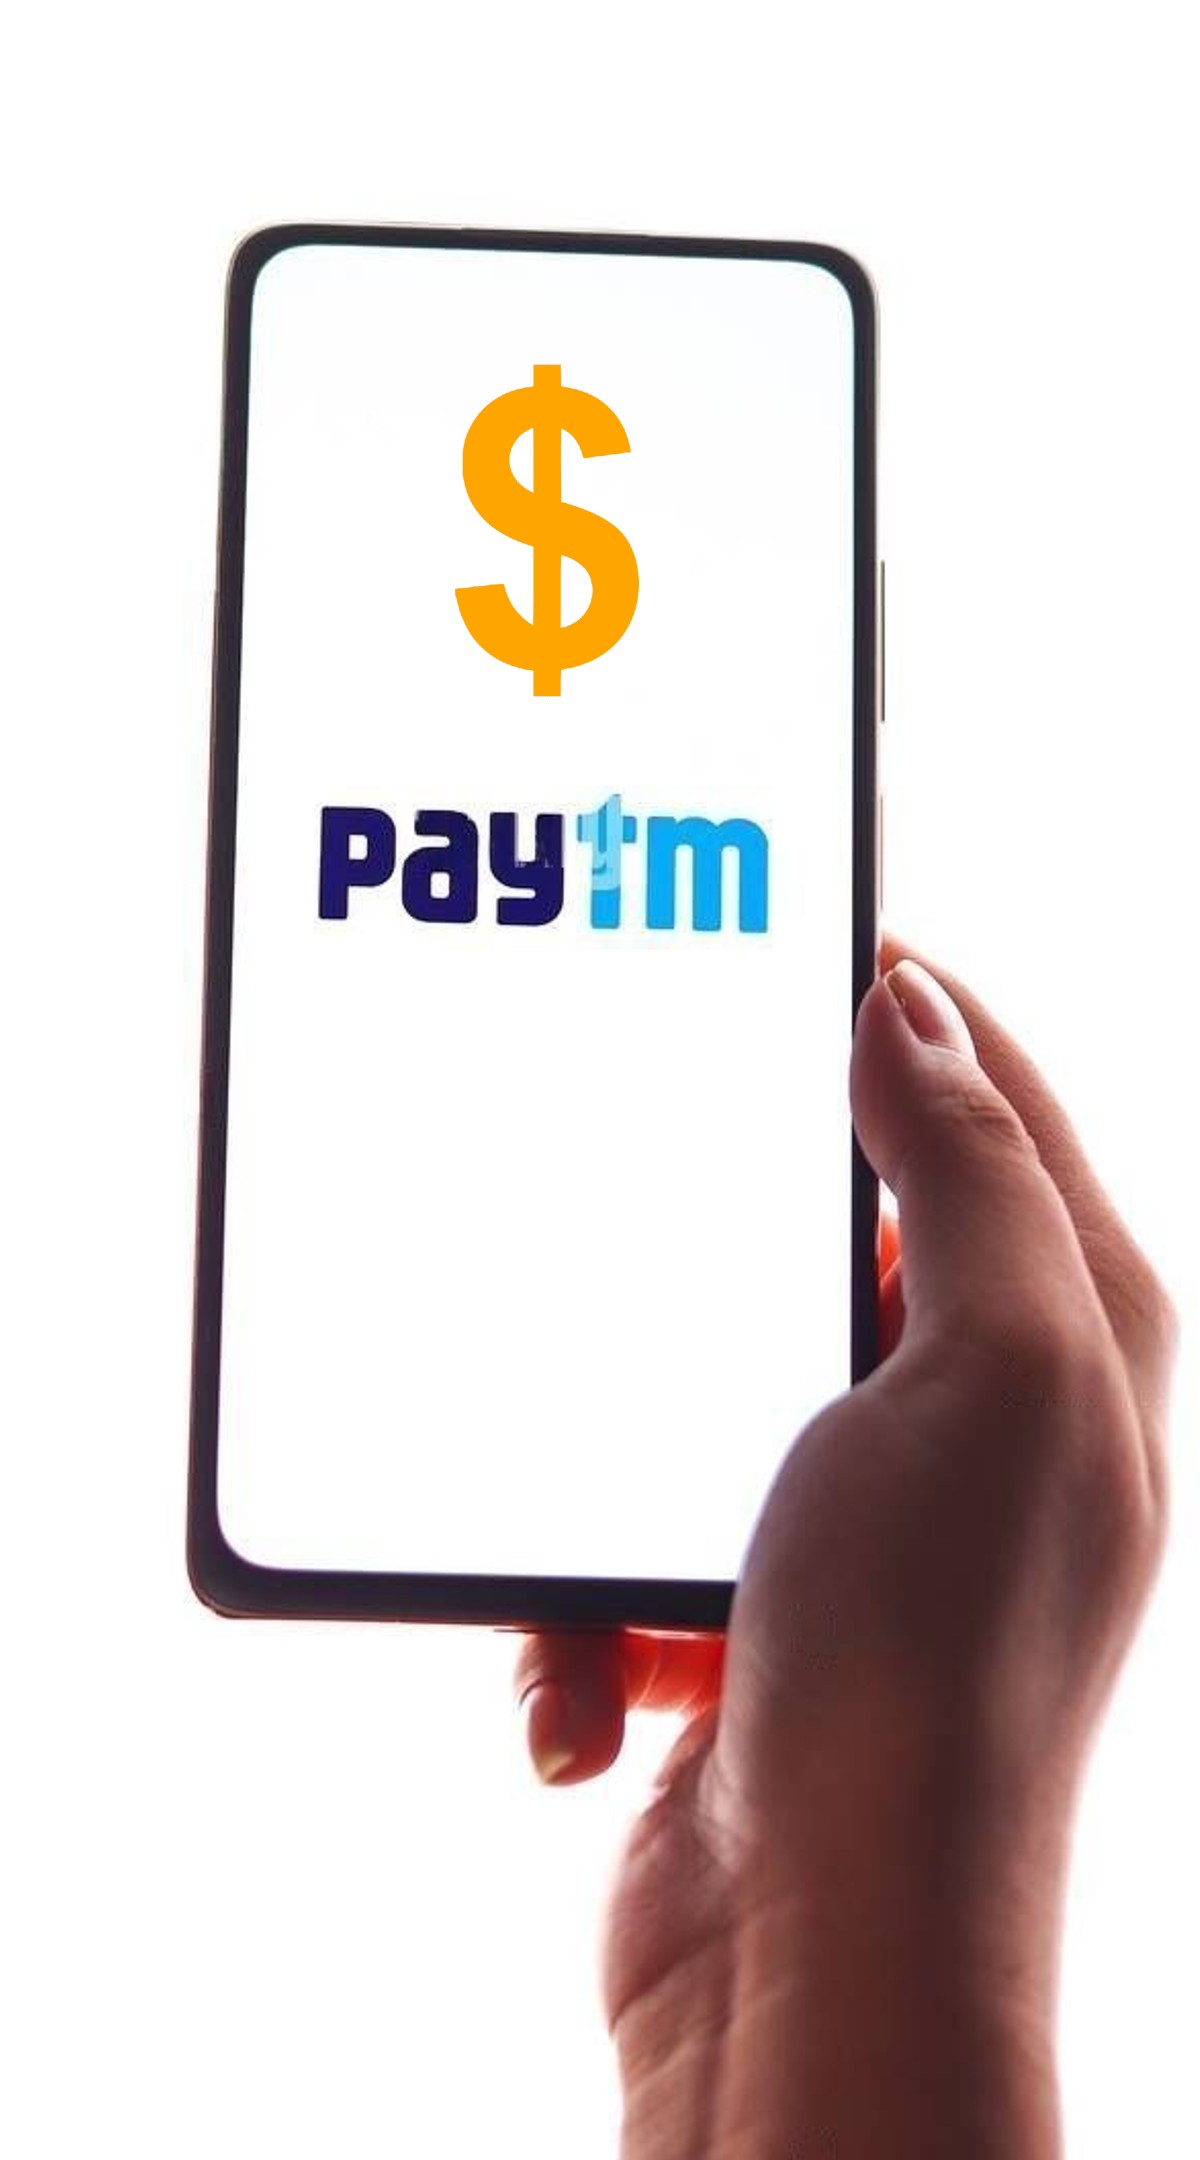 Paytm must pay Rs 3 lakh to doctor whose account was hacked, rules High Court